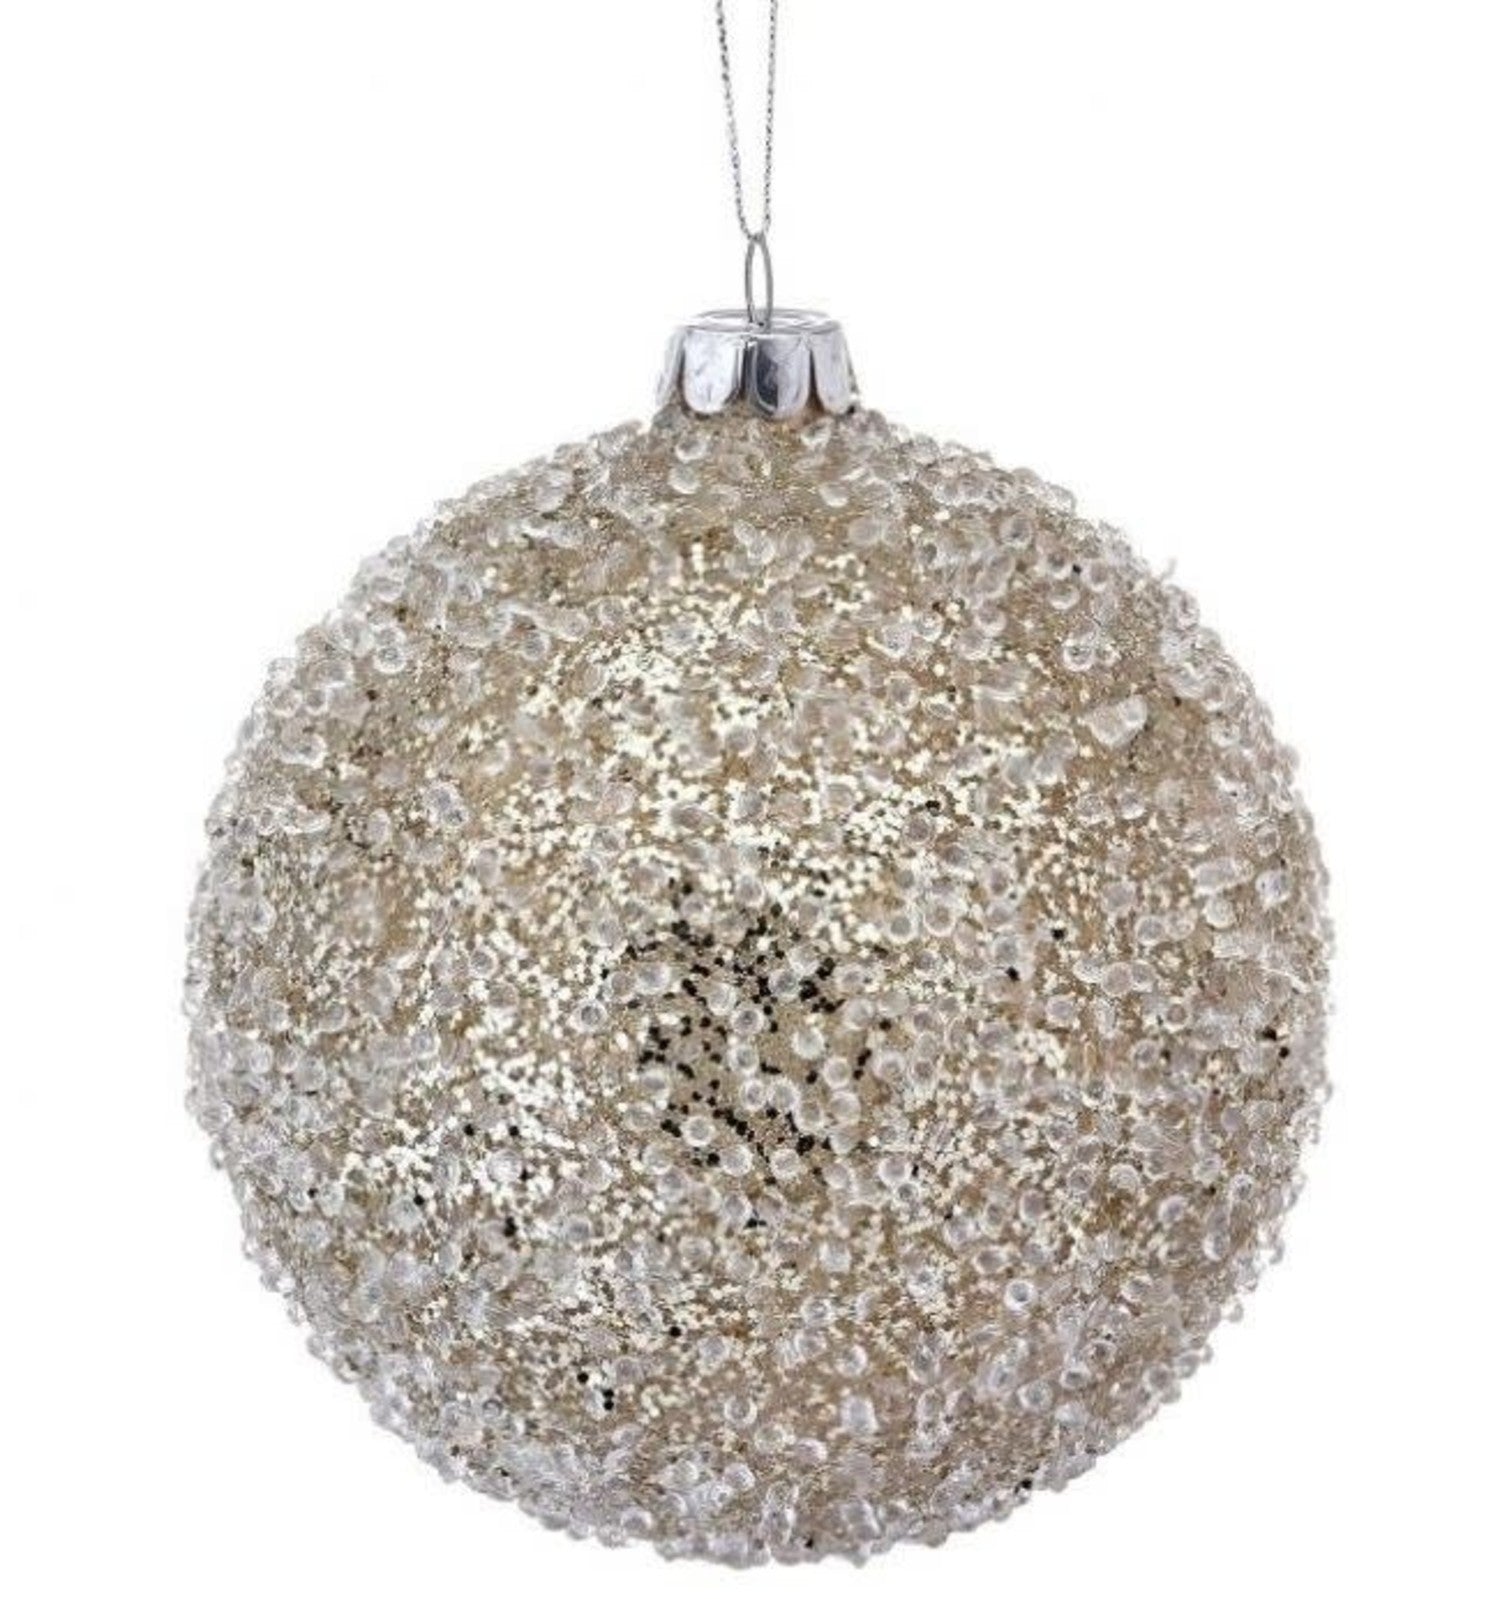 5" GLASS DIMPLED BEADED BALL ORNAMENT